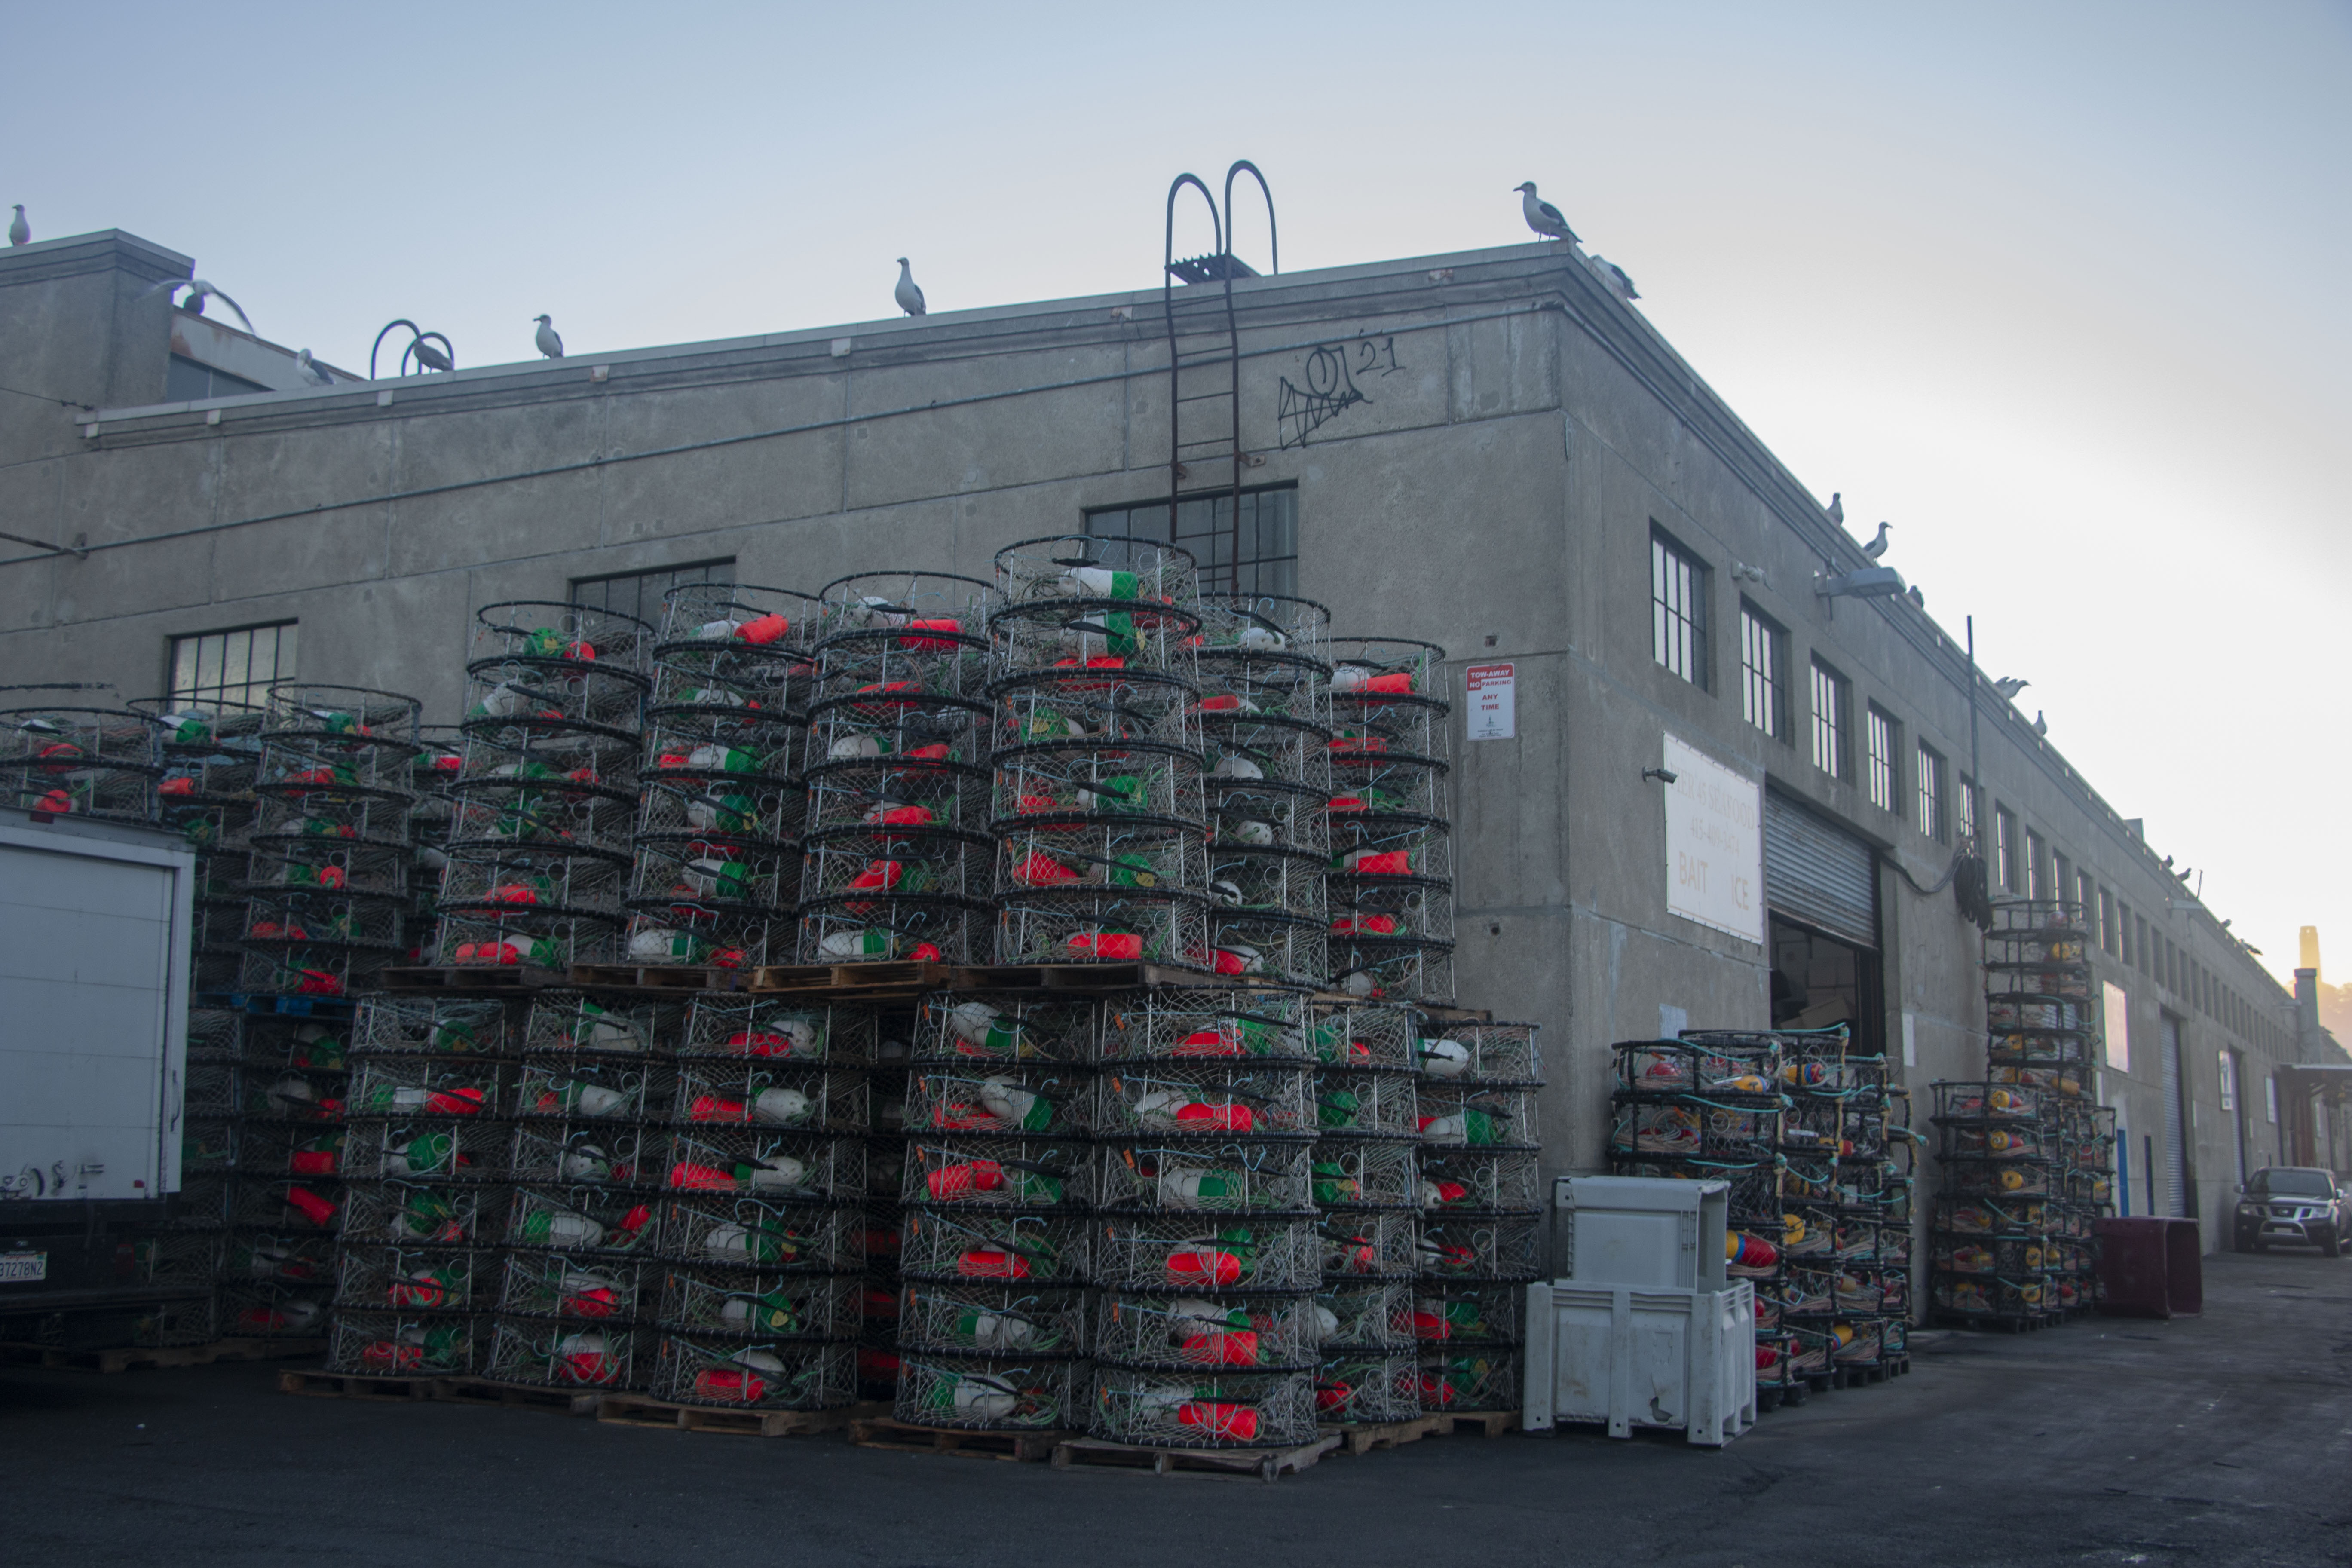 Crabbing traps are piled outside the warehouses in Pier 45